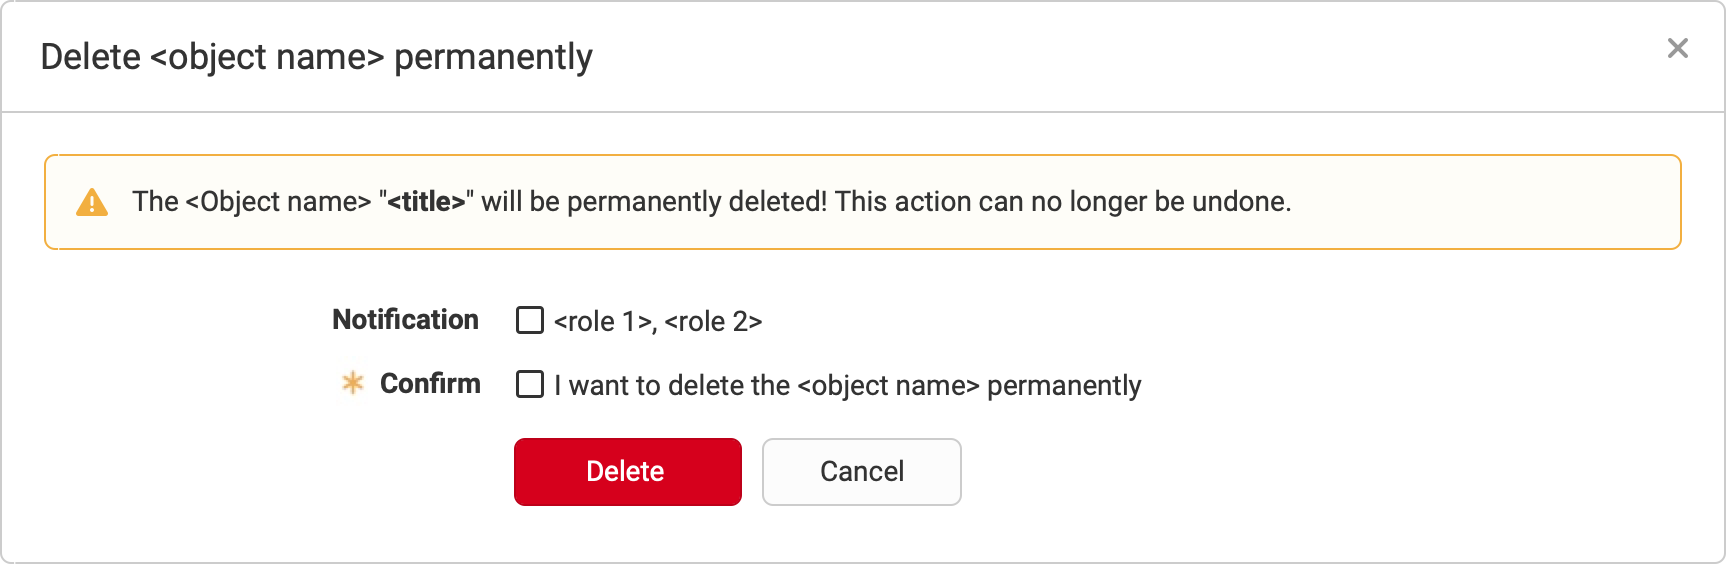 Single action for delete permanetly